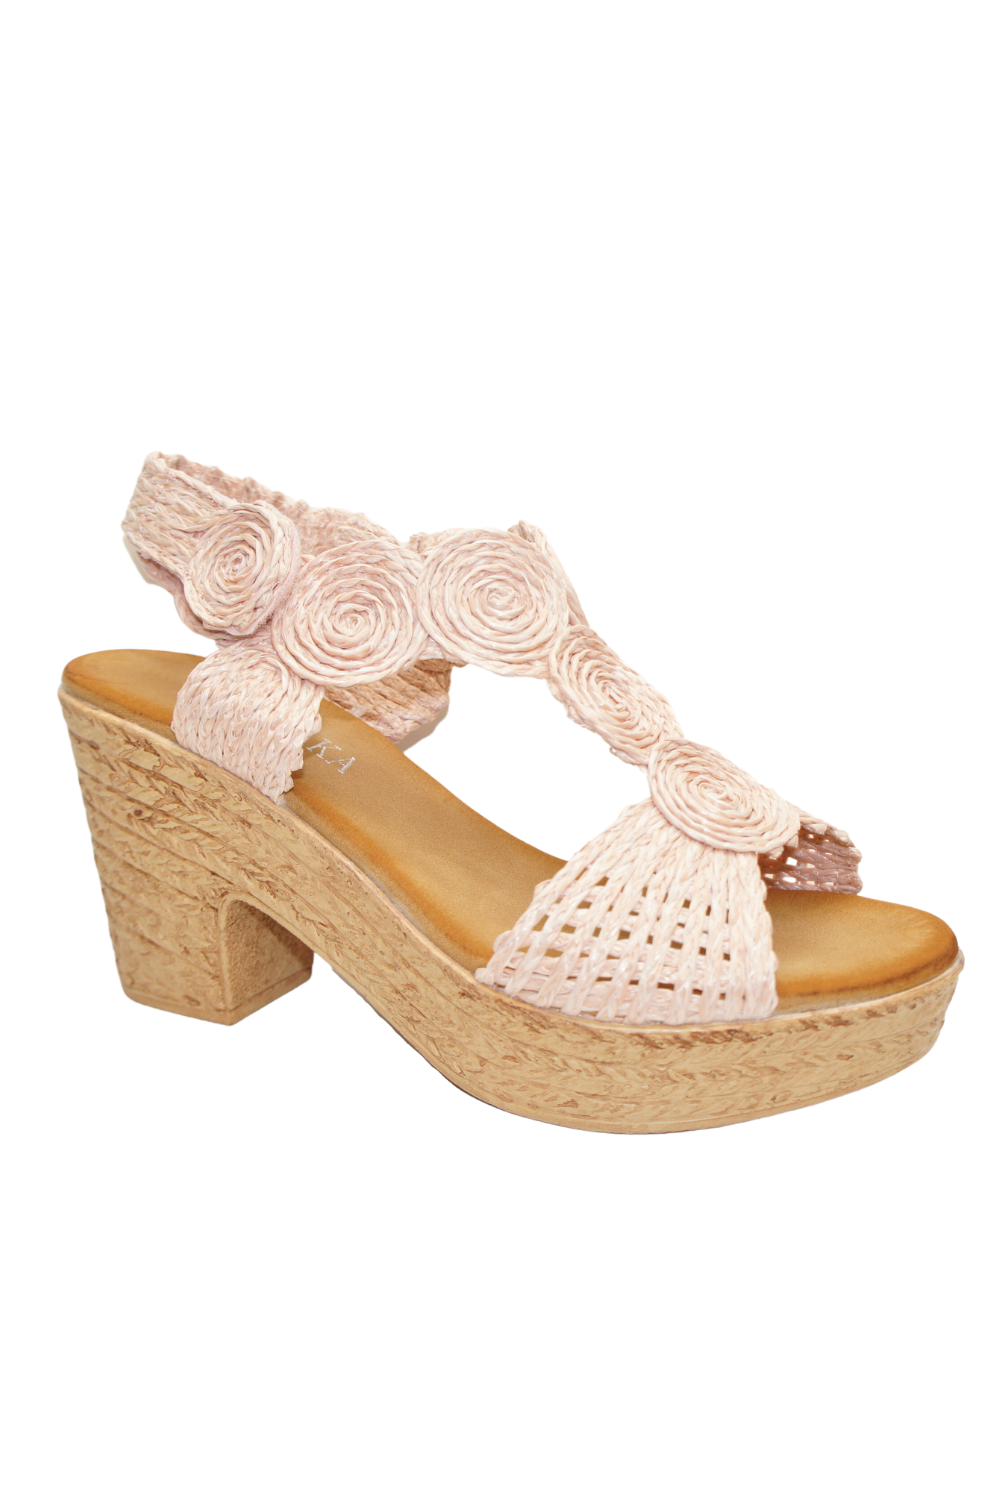 Enchant Floral Embroidered Block Heel Sandals - AirRobe